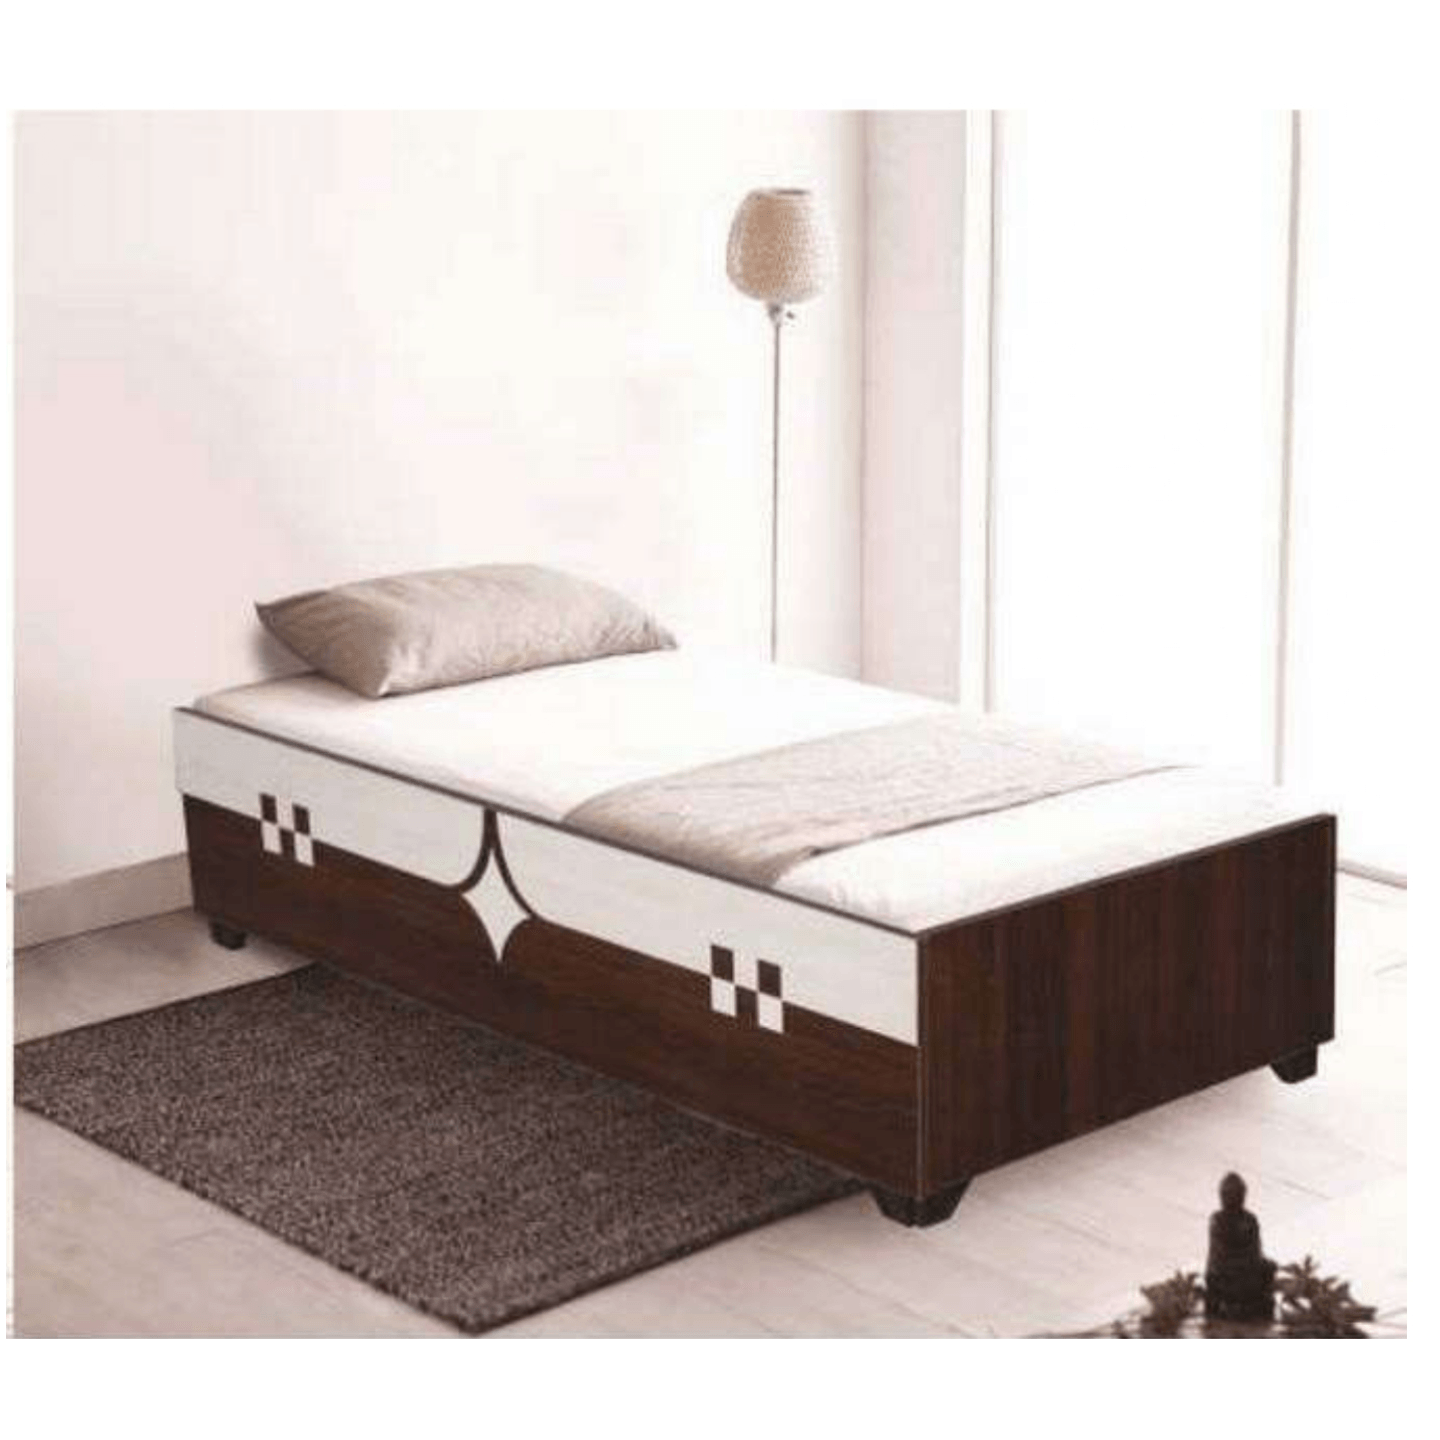 HS Single Bed Size 72"x30" Naira In Wenge Colour